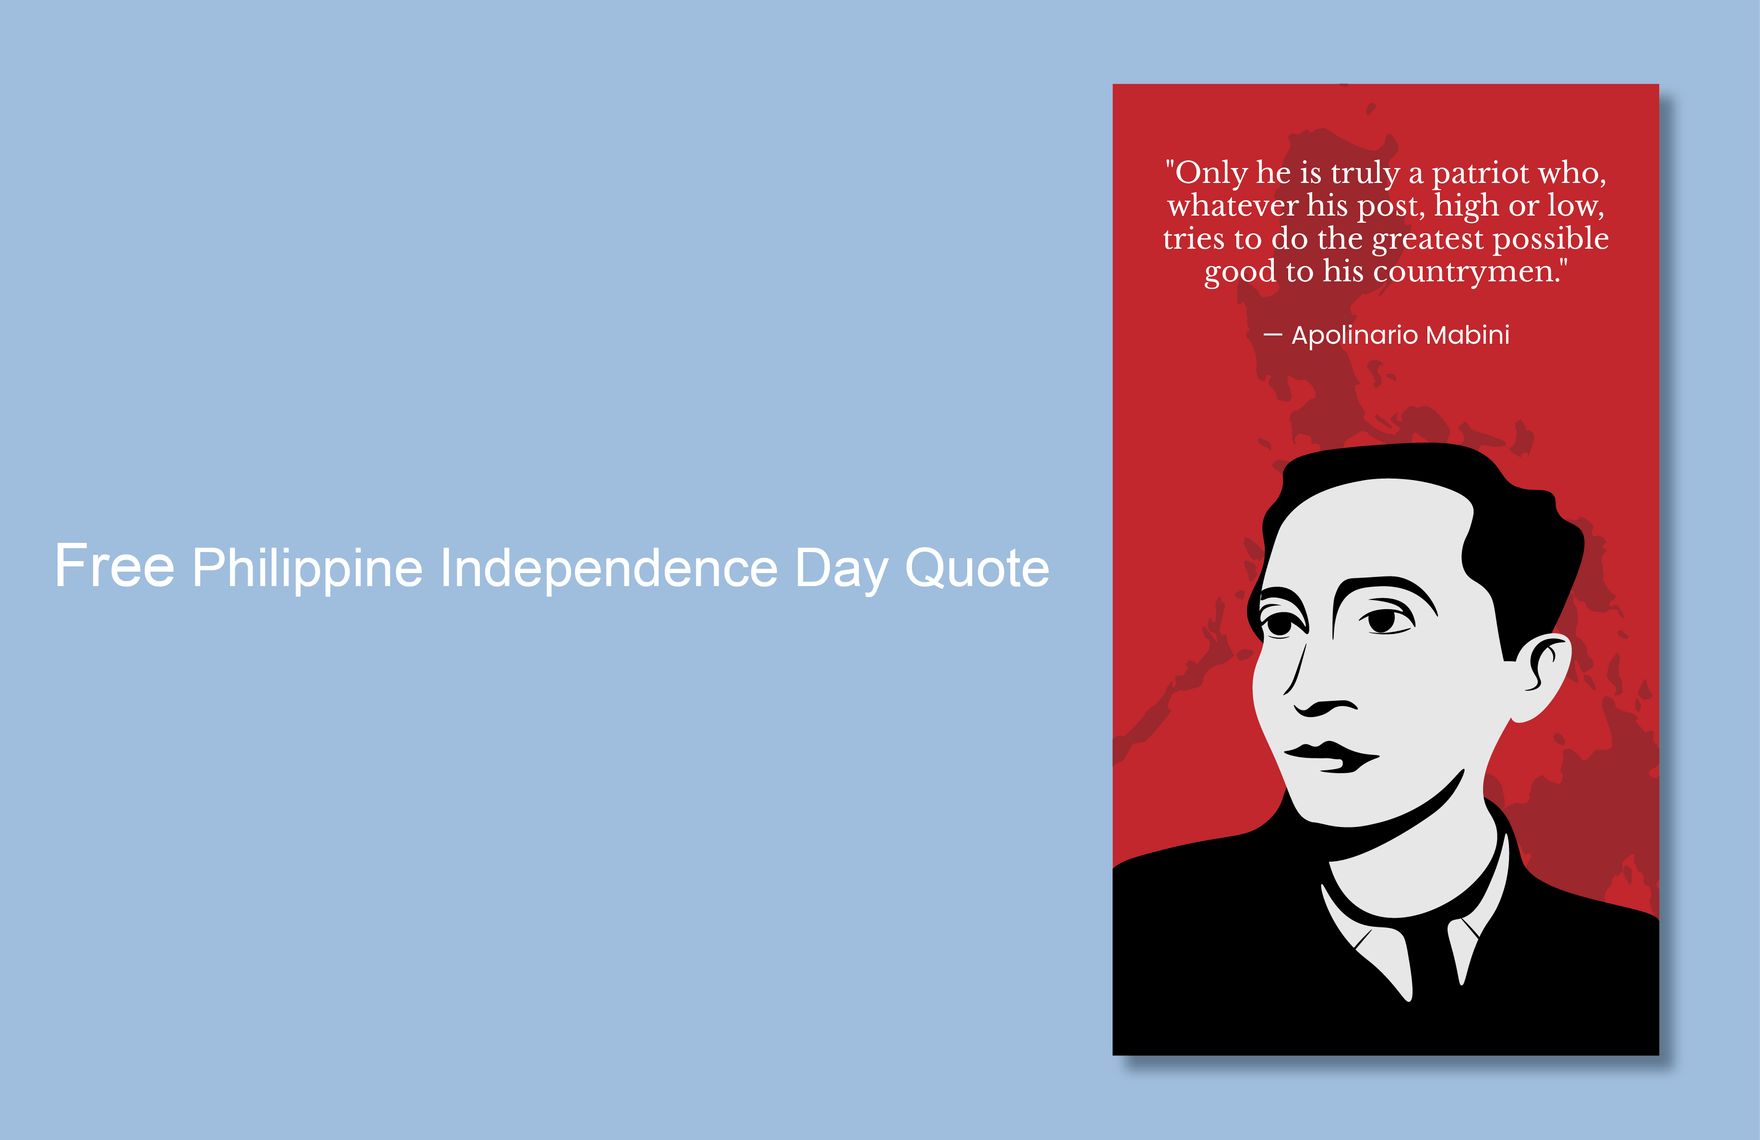 Free Philippine Independence Day Quote in Illustrator, JPG